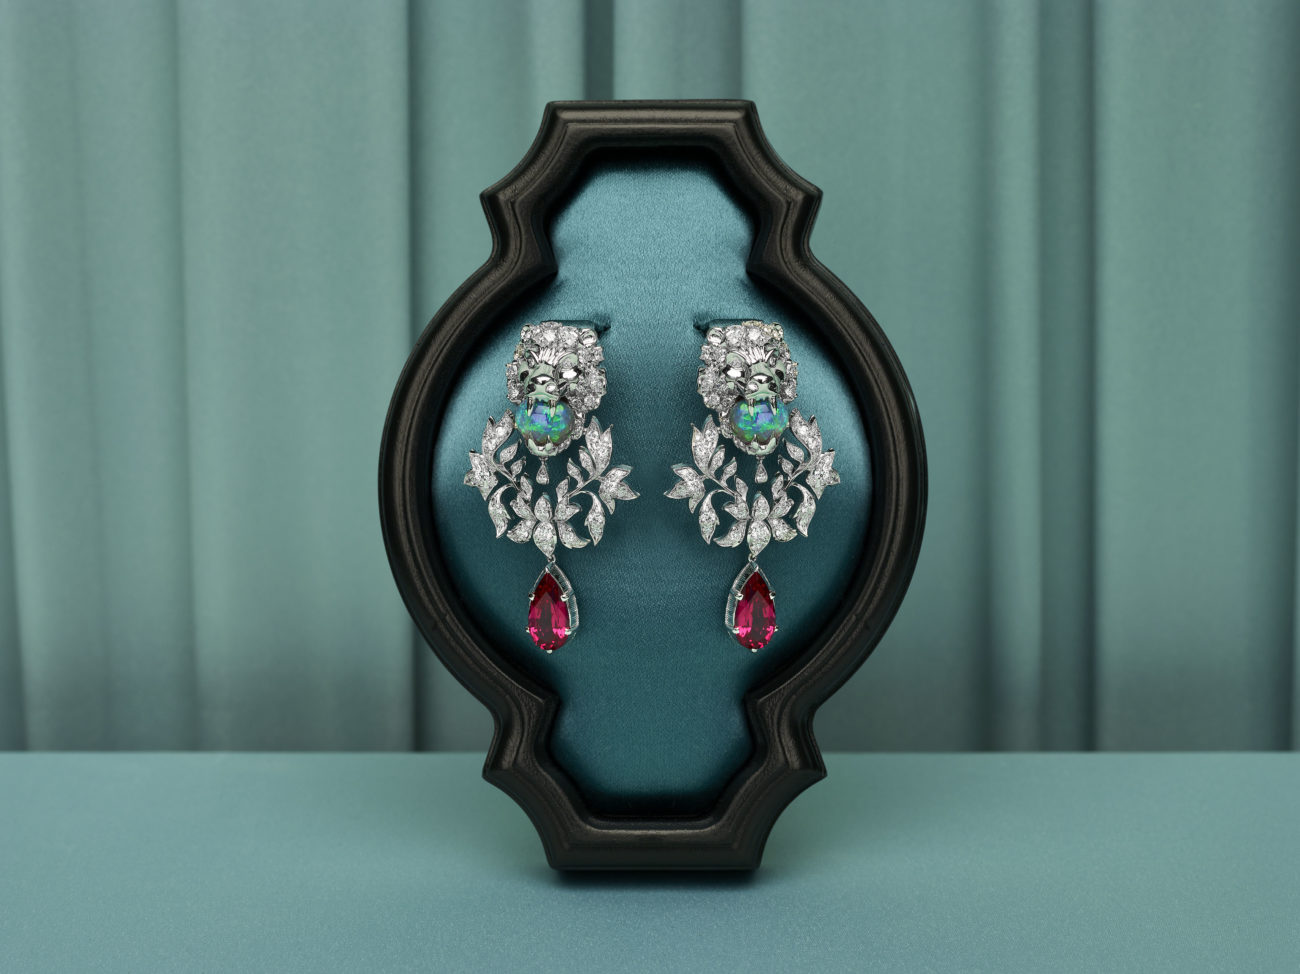 Gucci High Jewelry, Hortus Deliciarum Collection by Alessandro Michele, Courtesy of Gucci